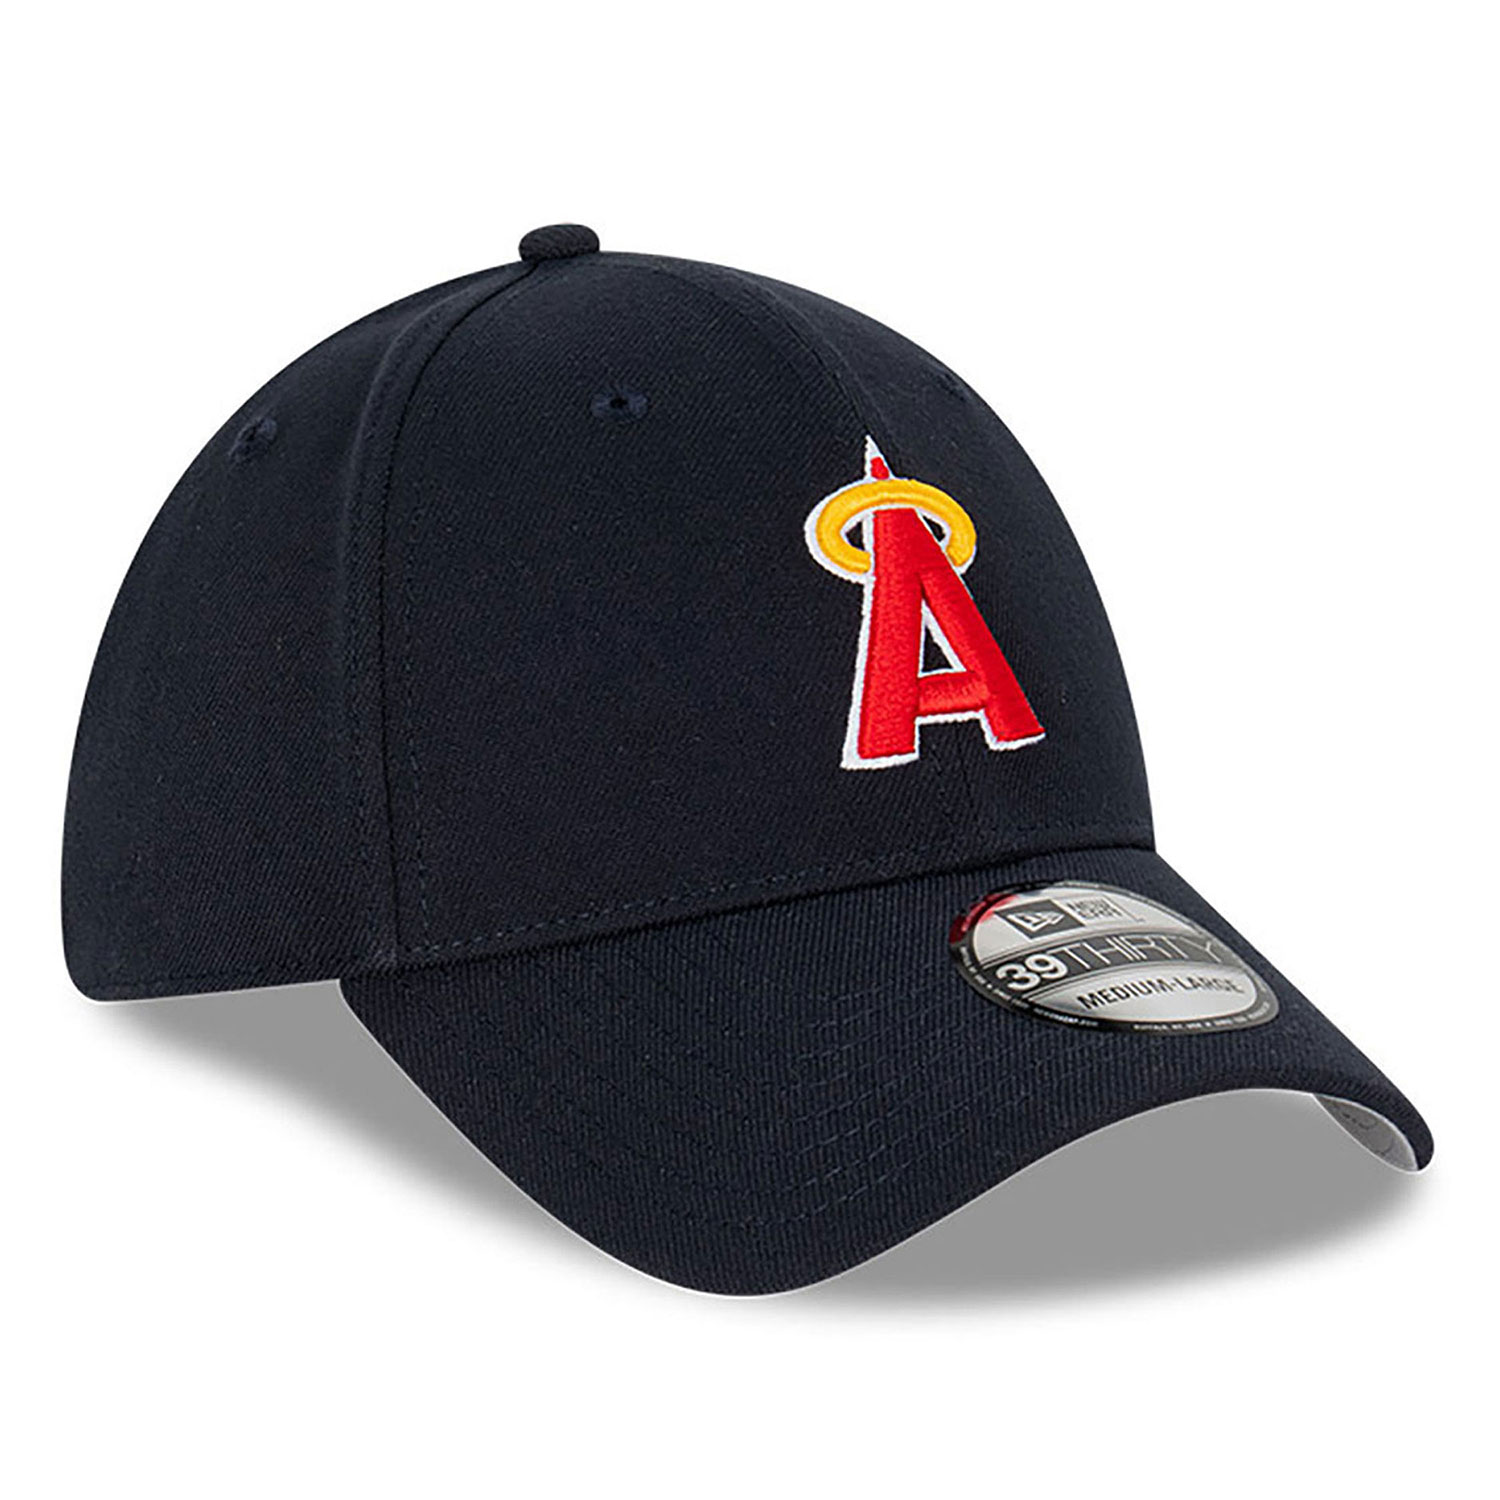 LA Angels Cooperstown Navy 39THIRTY Stretch Fit Cap